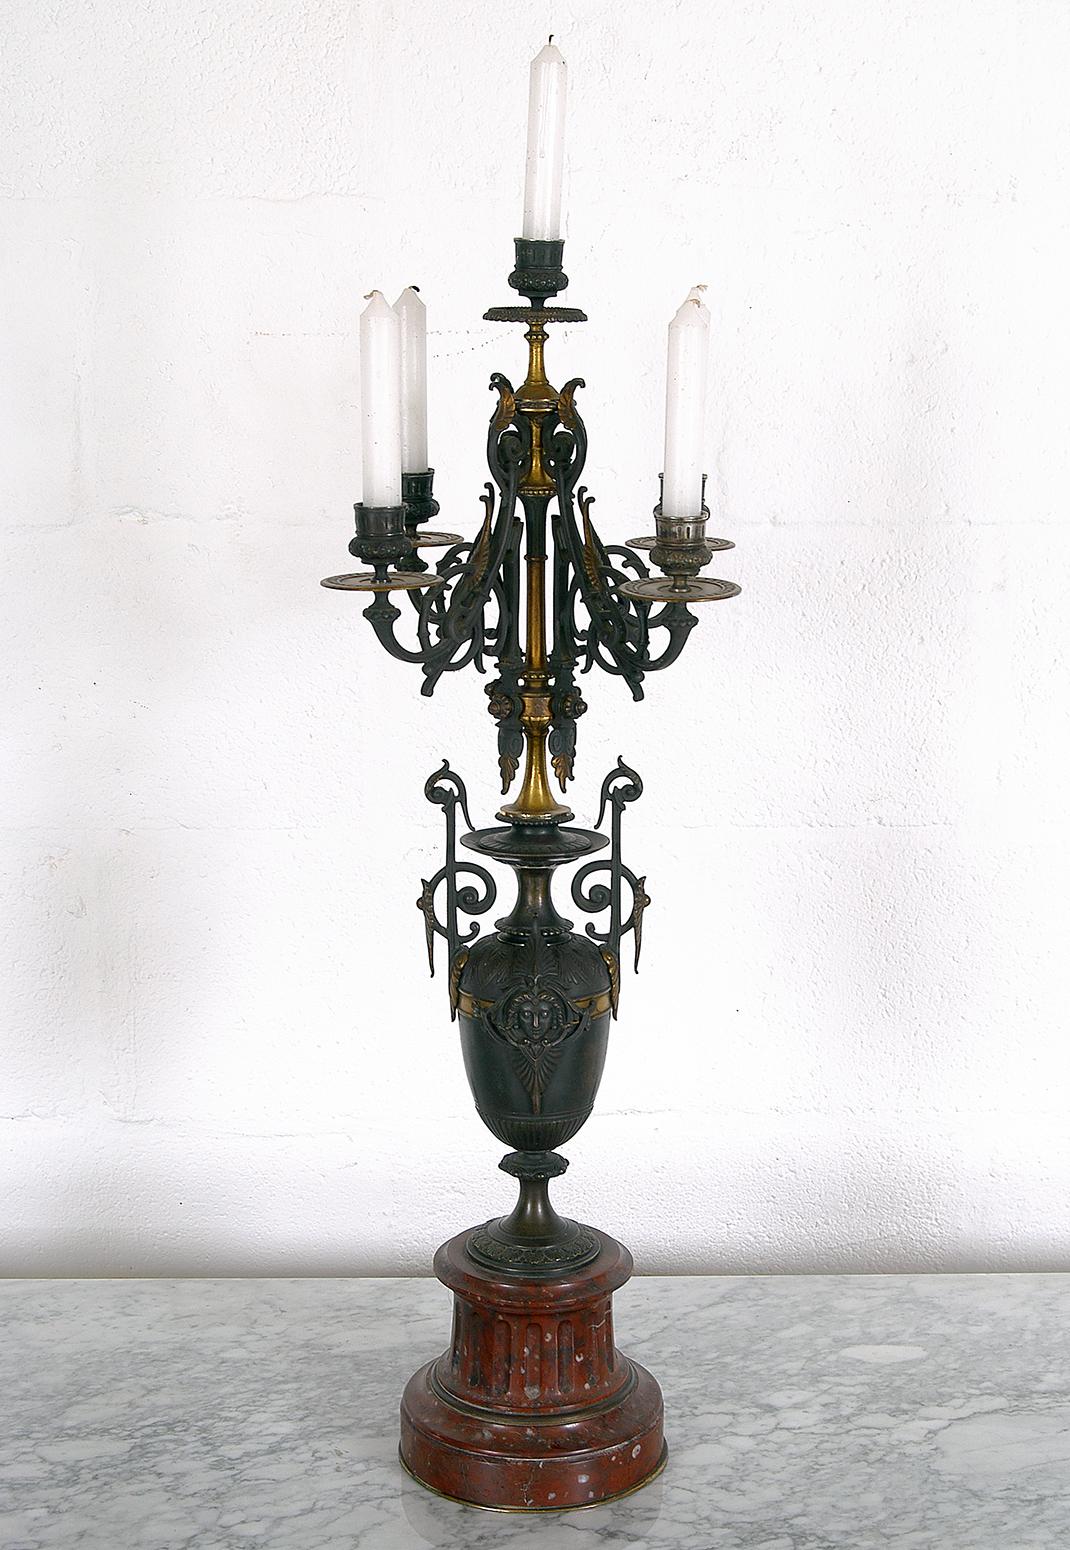 Wonderfully ostentatious urn shaped candelabra made of gilt and patinated bronze, raised on a red Languedoc marble support, which holds five candles with Classic effortless style, 19th century.
In good original condition, and ready to grace your